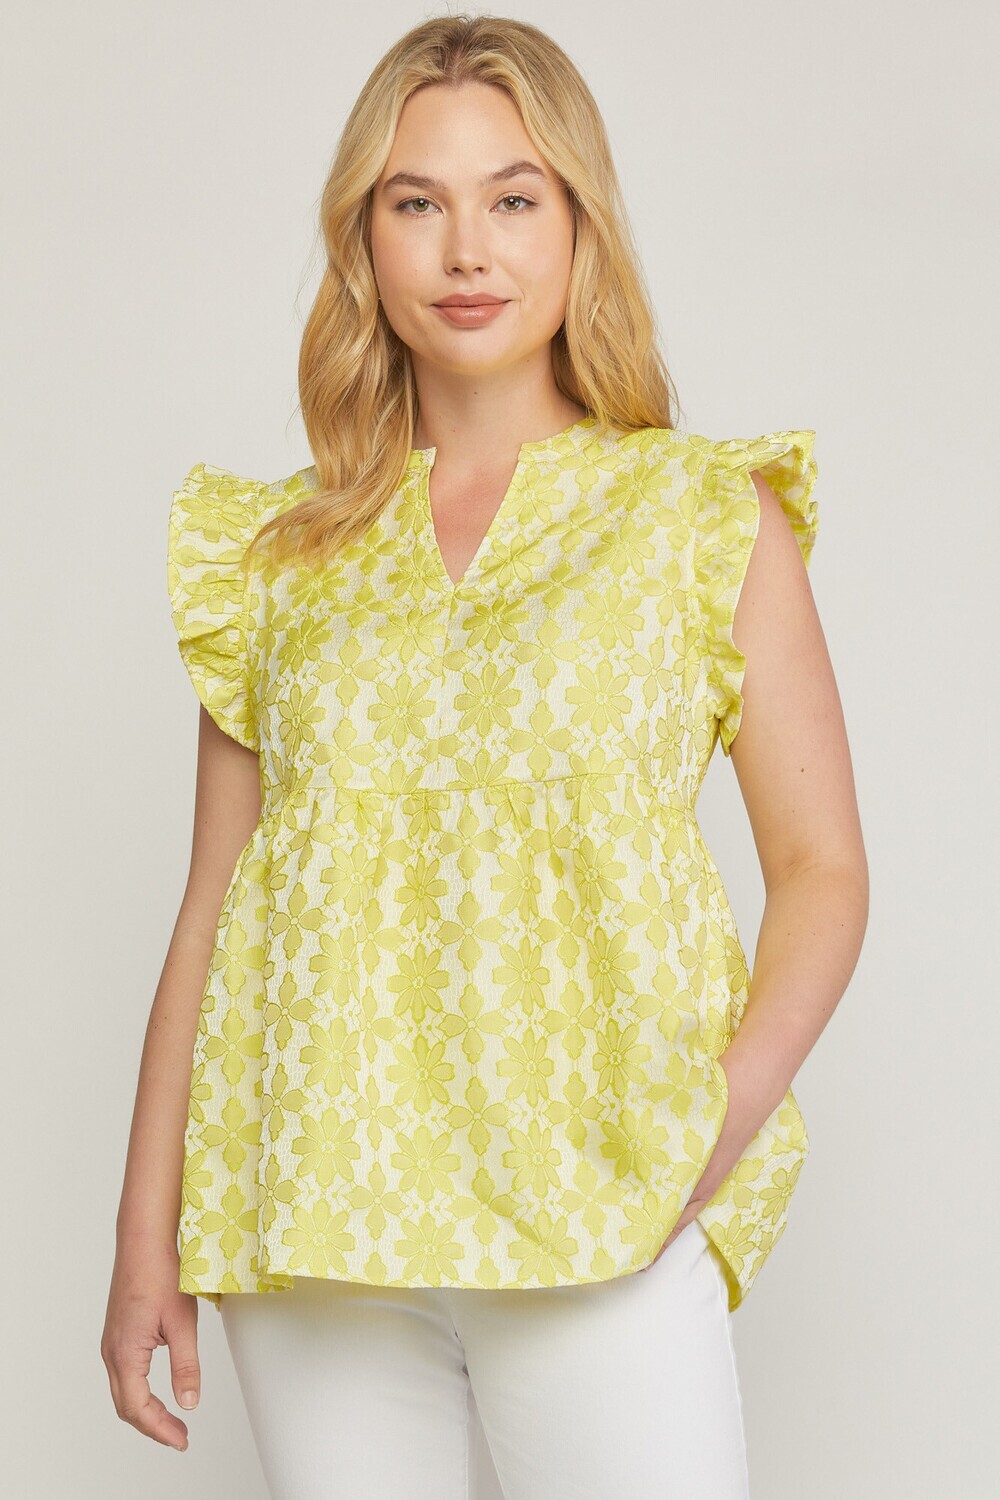 Chartreuse Oasis Top, PLUS